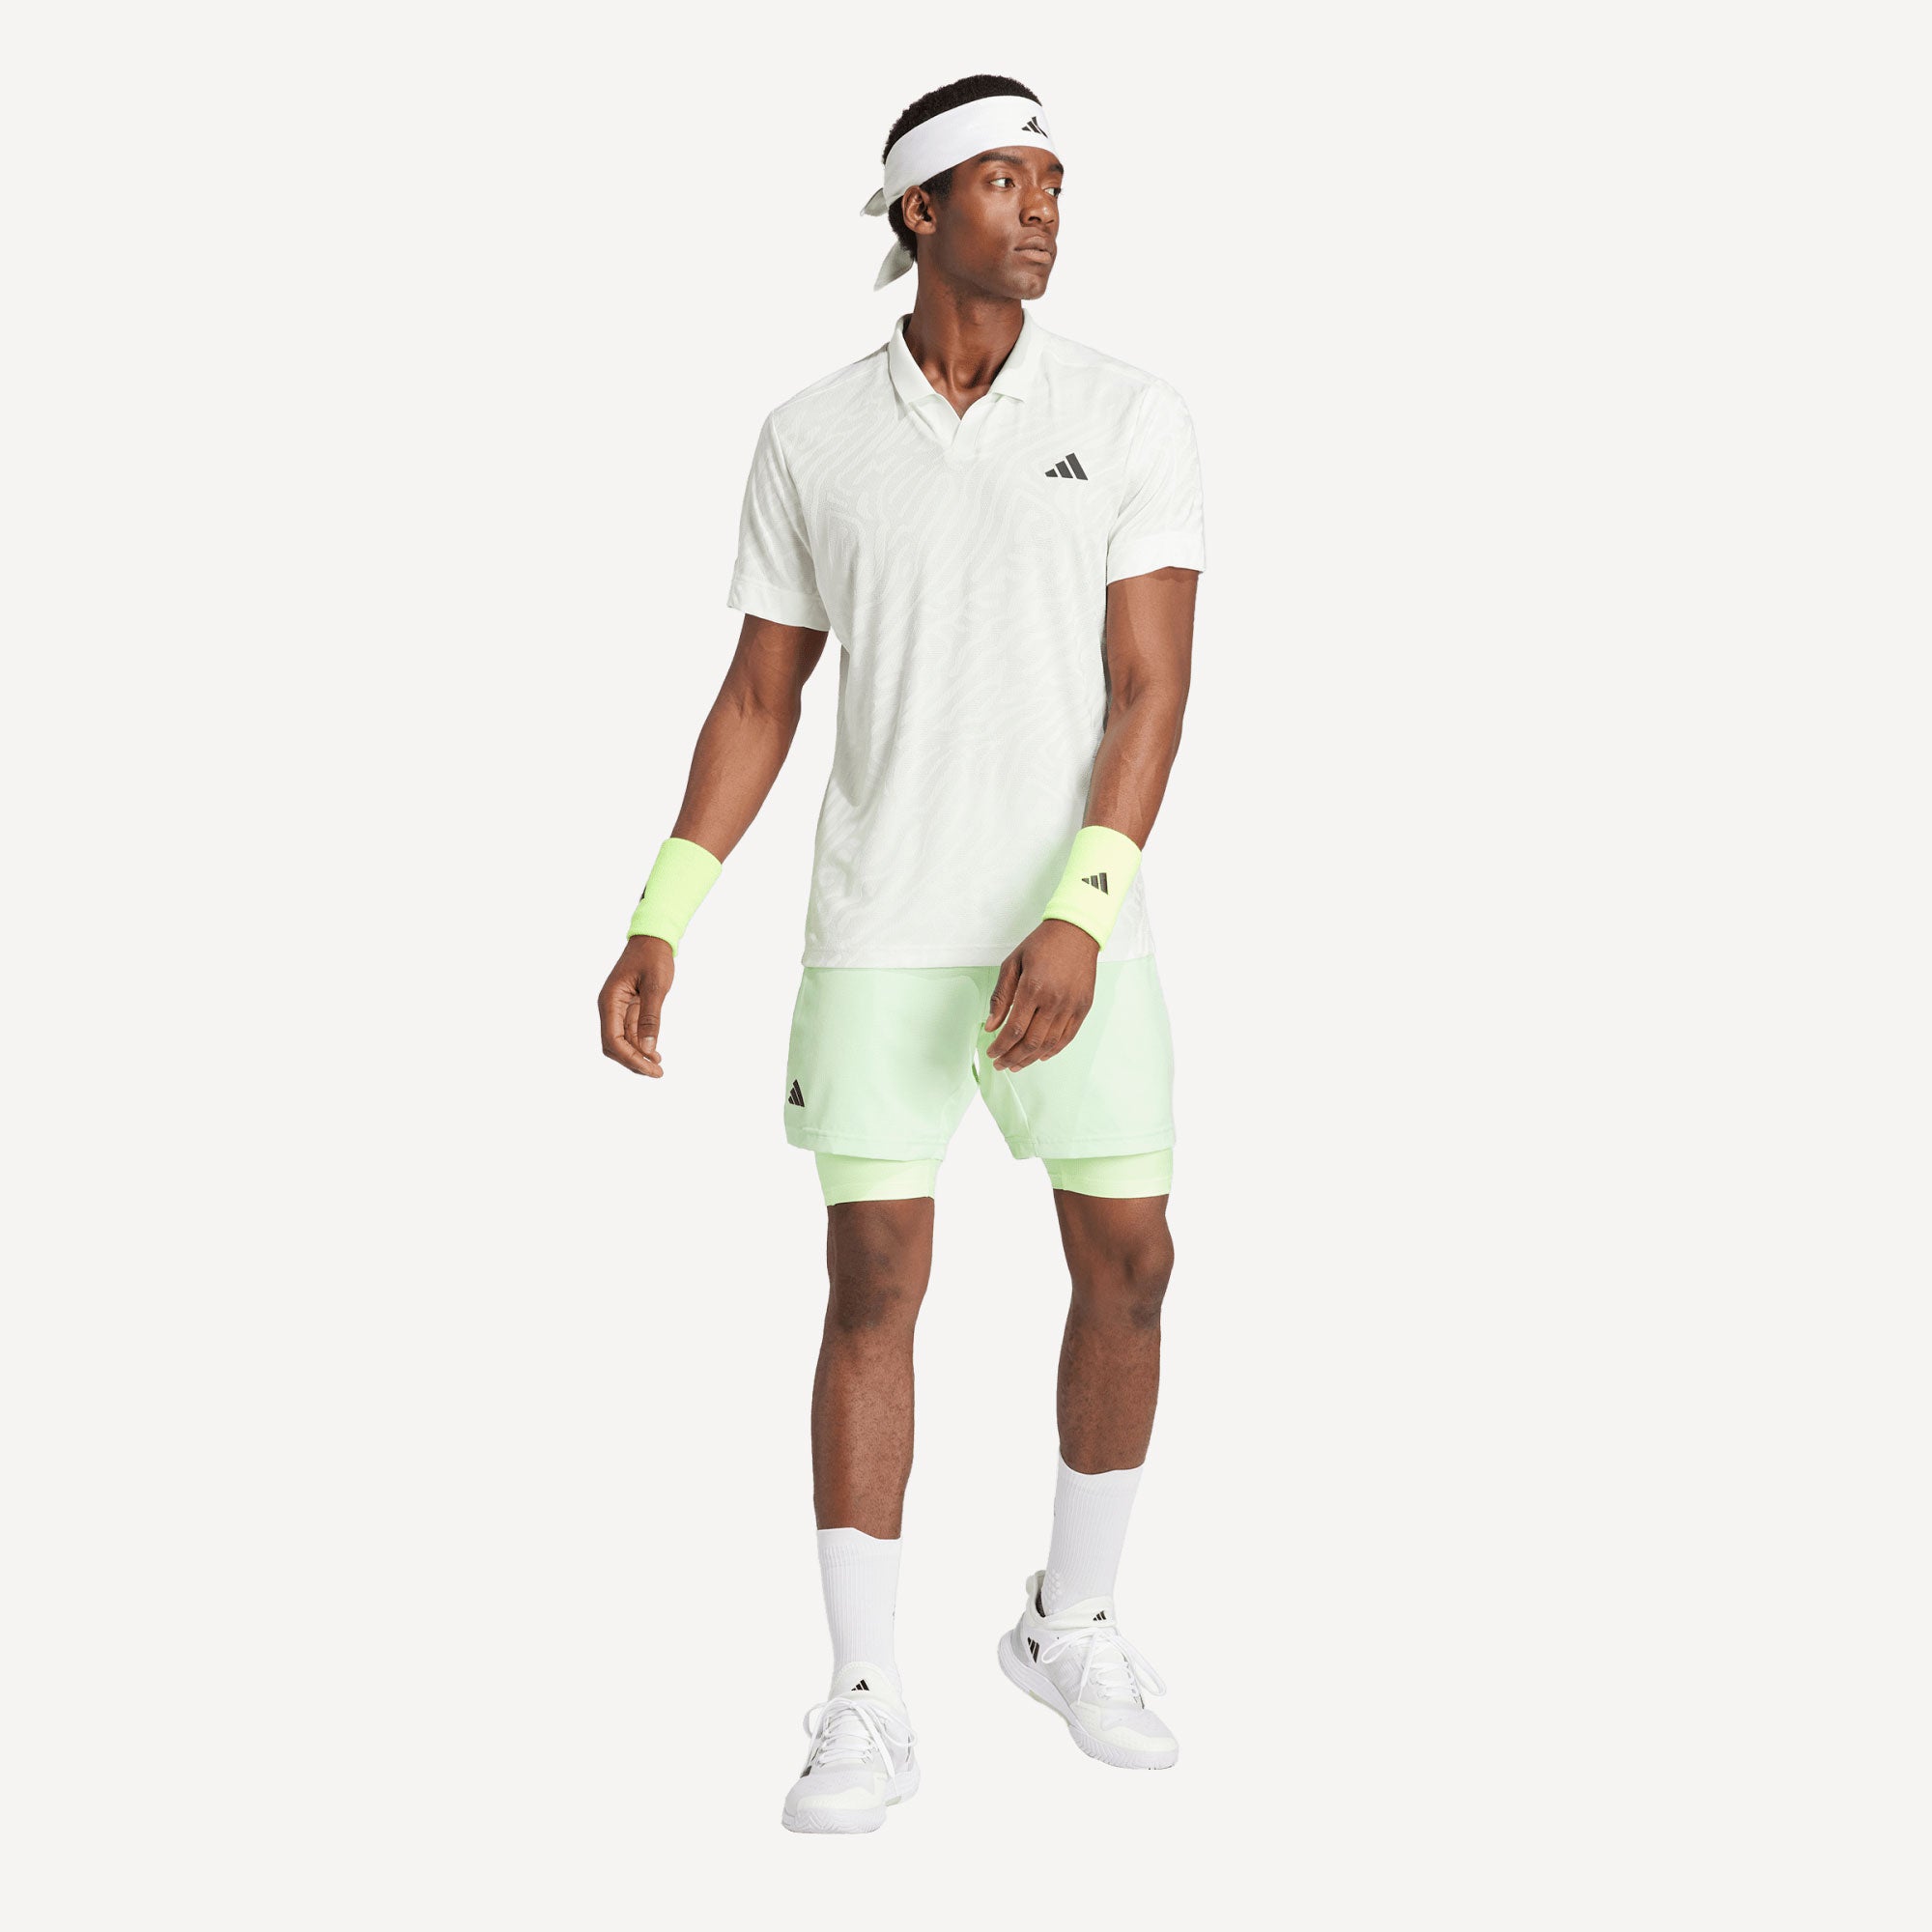 adidas Pro Melbourne Men's Tennis Shorts and Inner Shorts Set - Green (4)